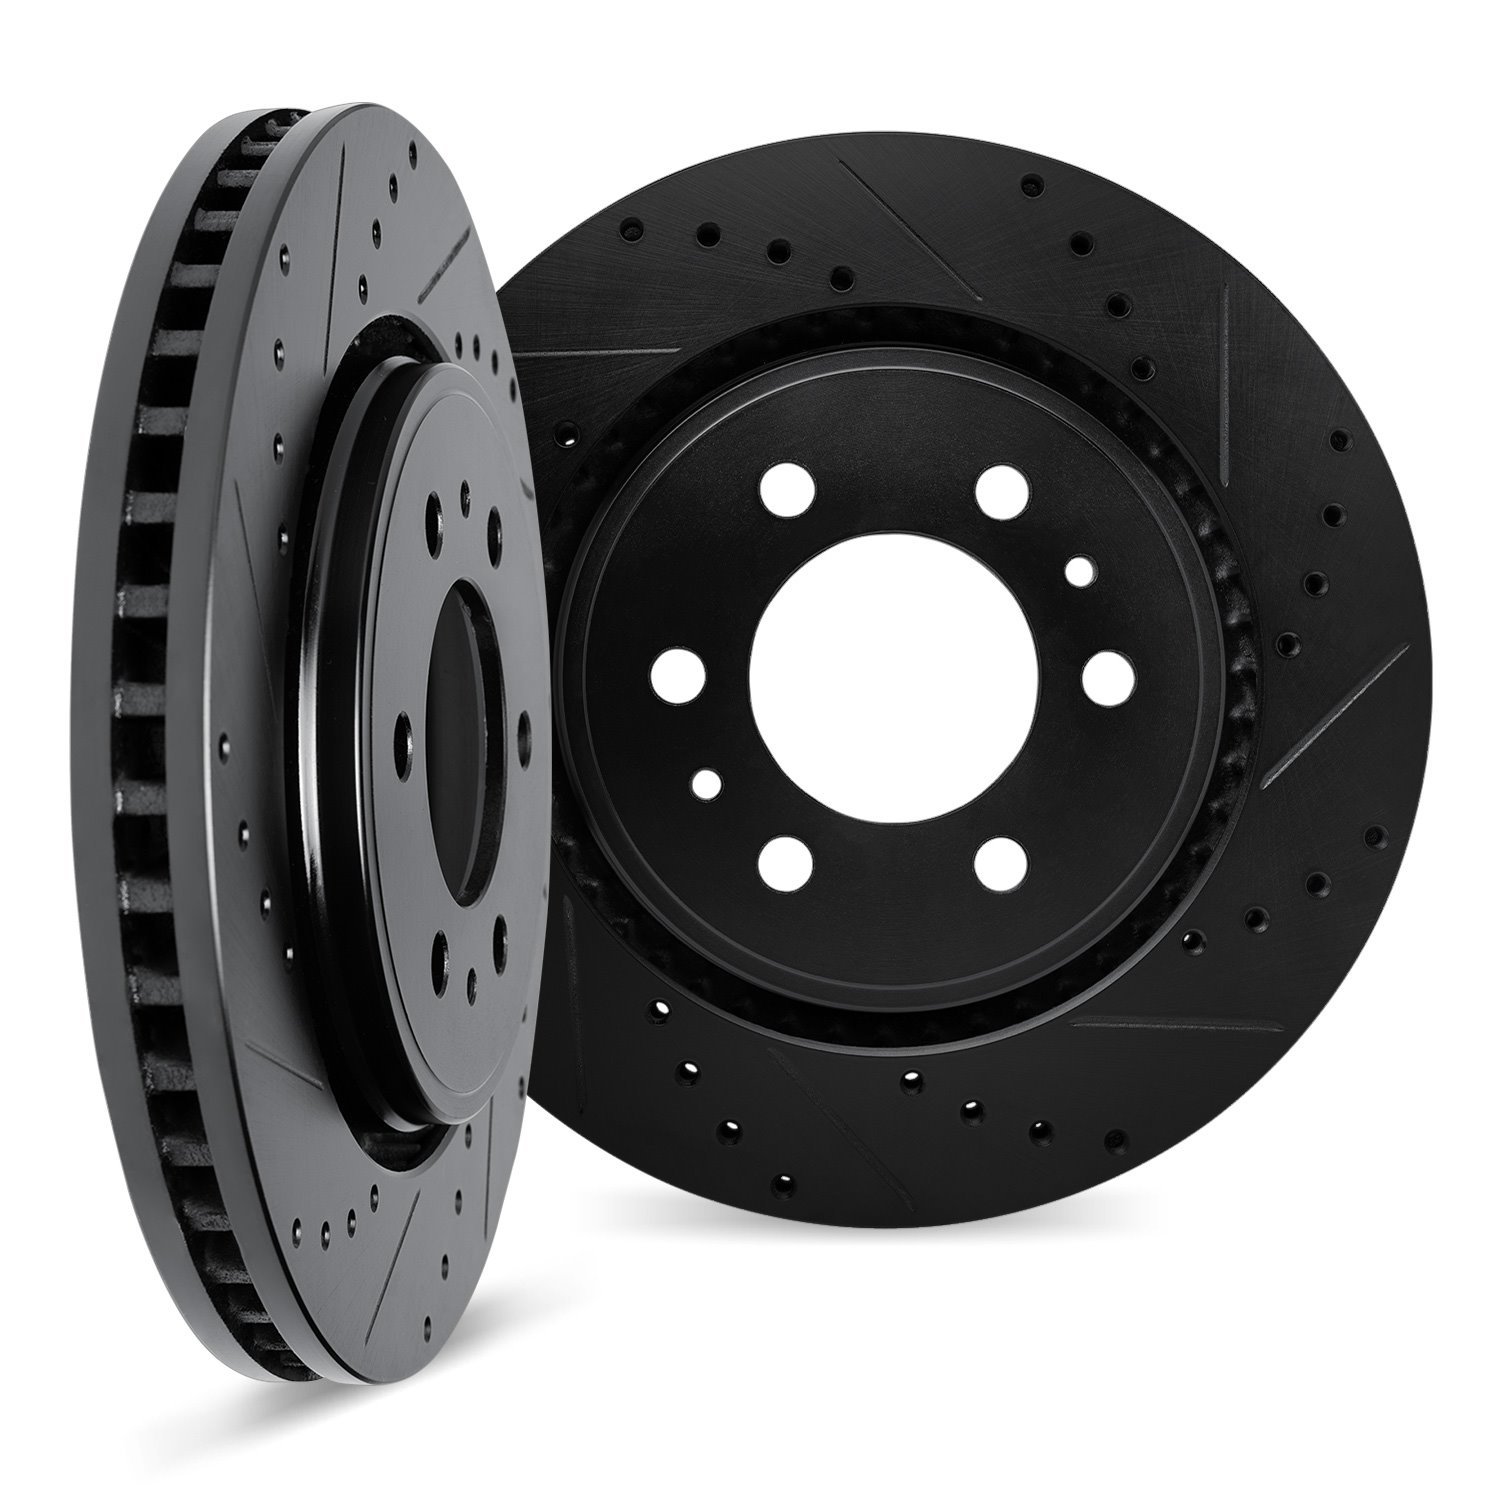 8002-67009 Drilled/Slotted Brake Rotors [Black], 1996-2004 Infiniti/Nissan, Position: Front